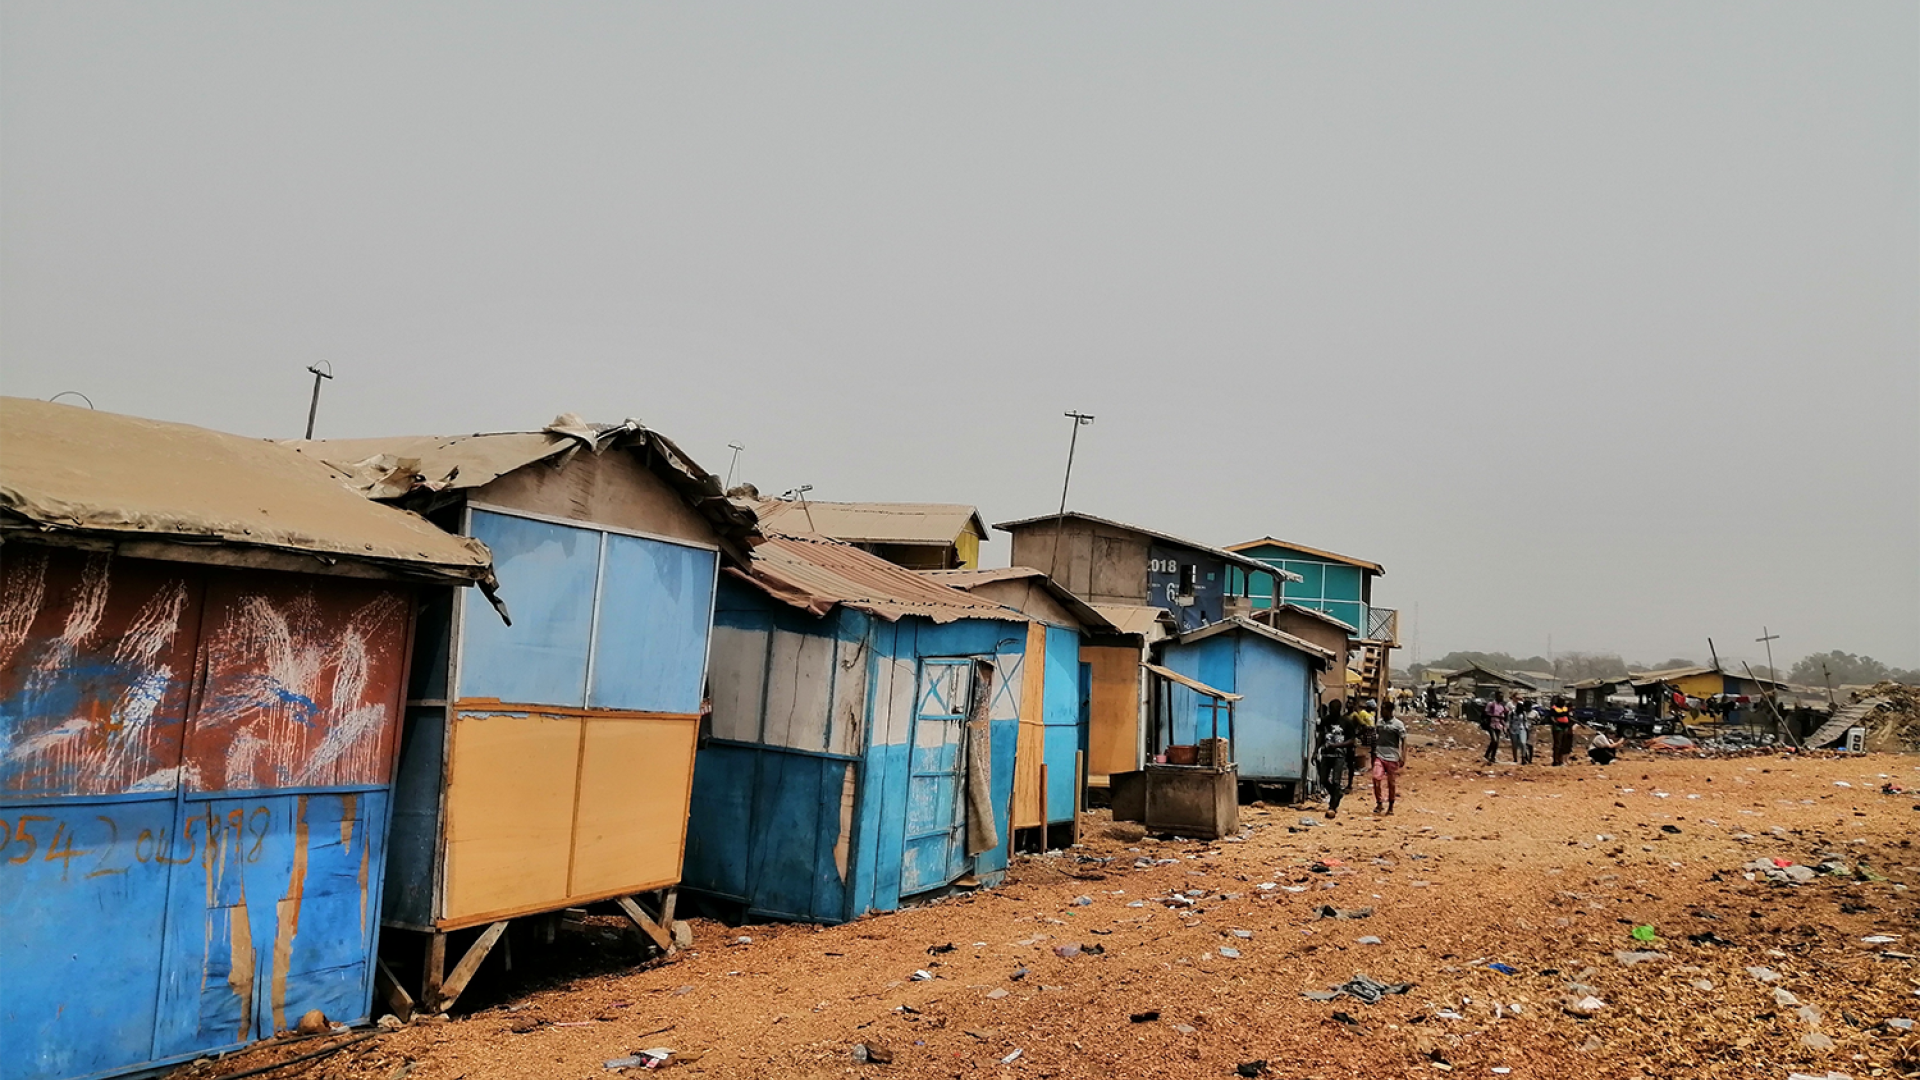 A row of shelters built from colorful sheets of metal with tan rooves extends into the distance. The rocky tan ground has trash scattered across it.